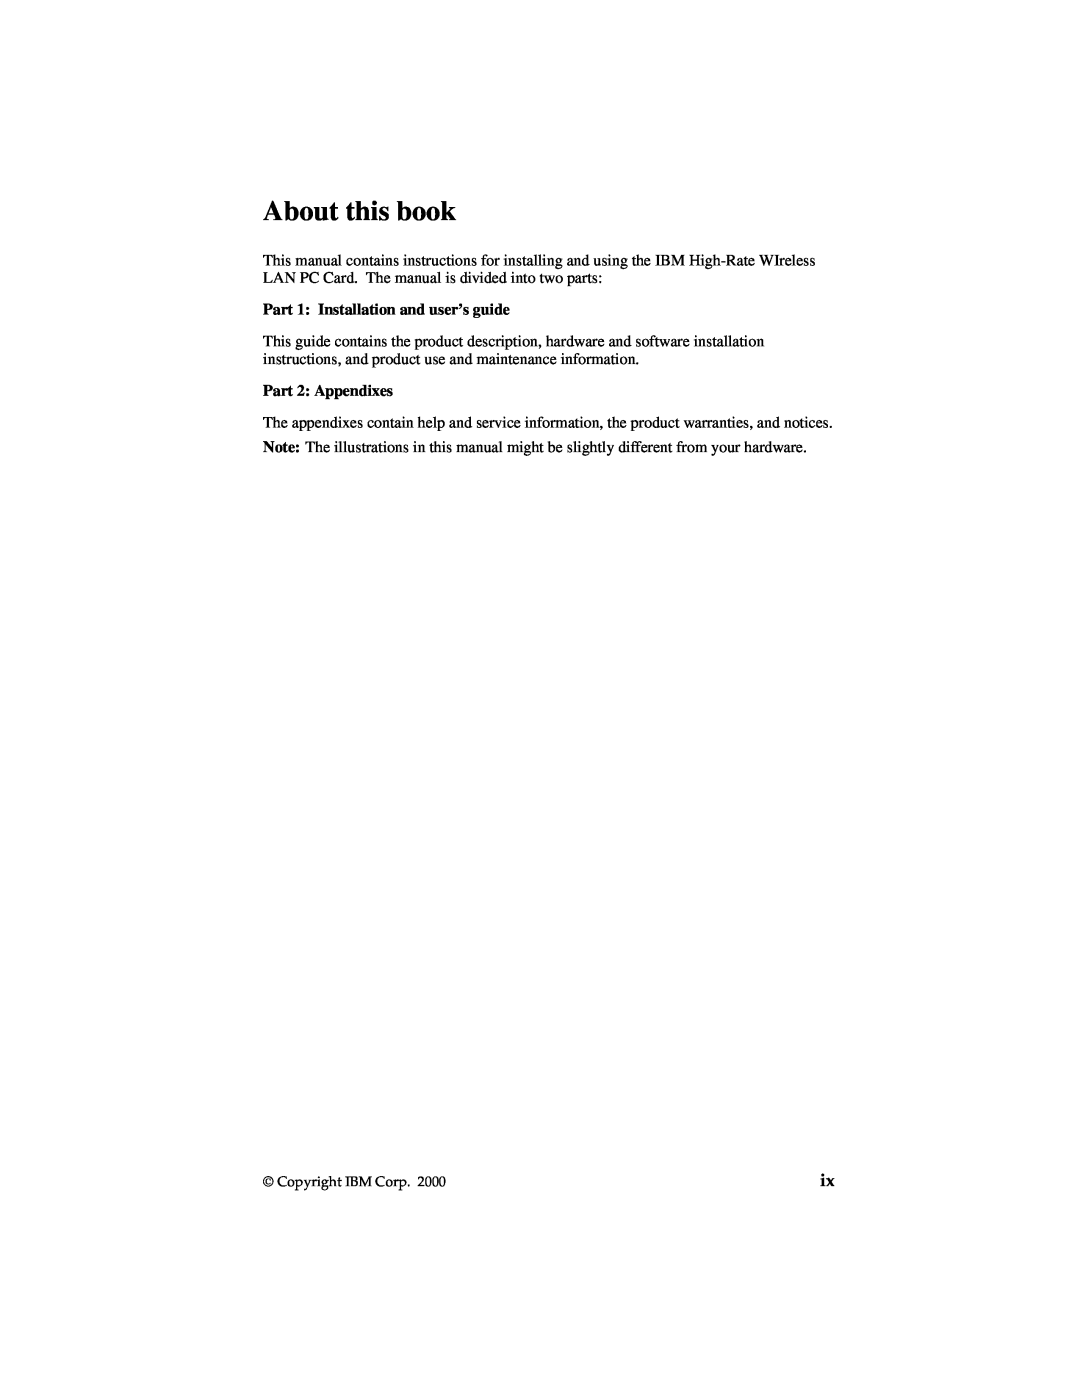 IBM 19K4543 manual About this book, Part 1 Installation and user’s guide, Part 2 Appendixes 